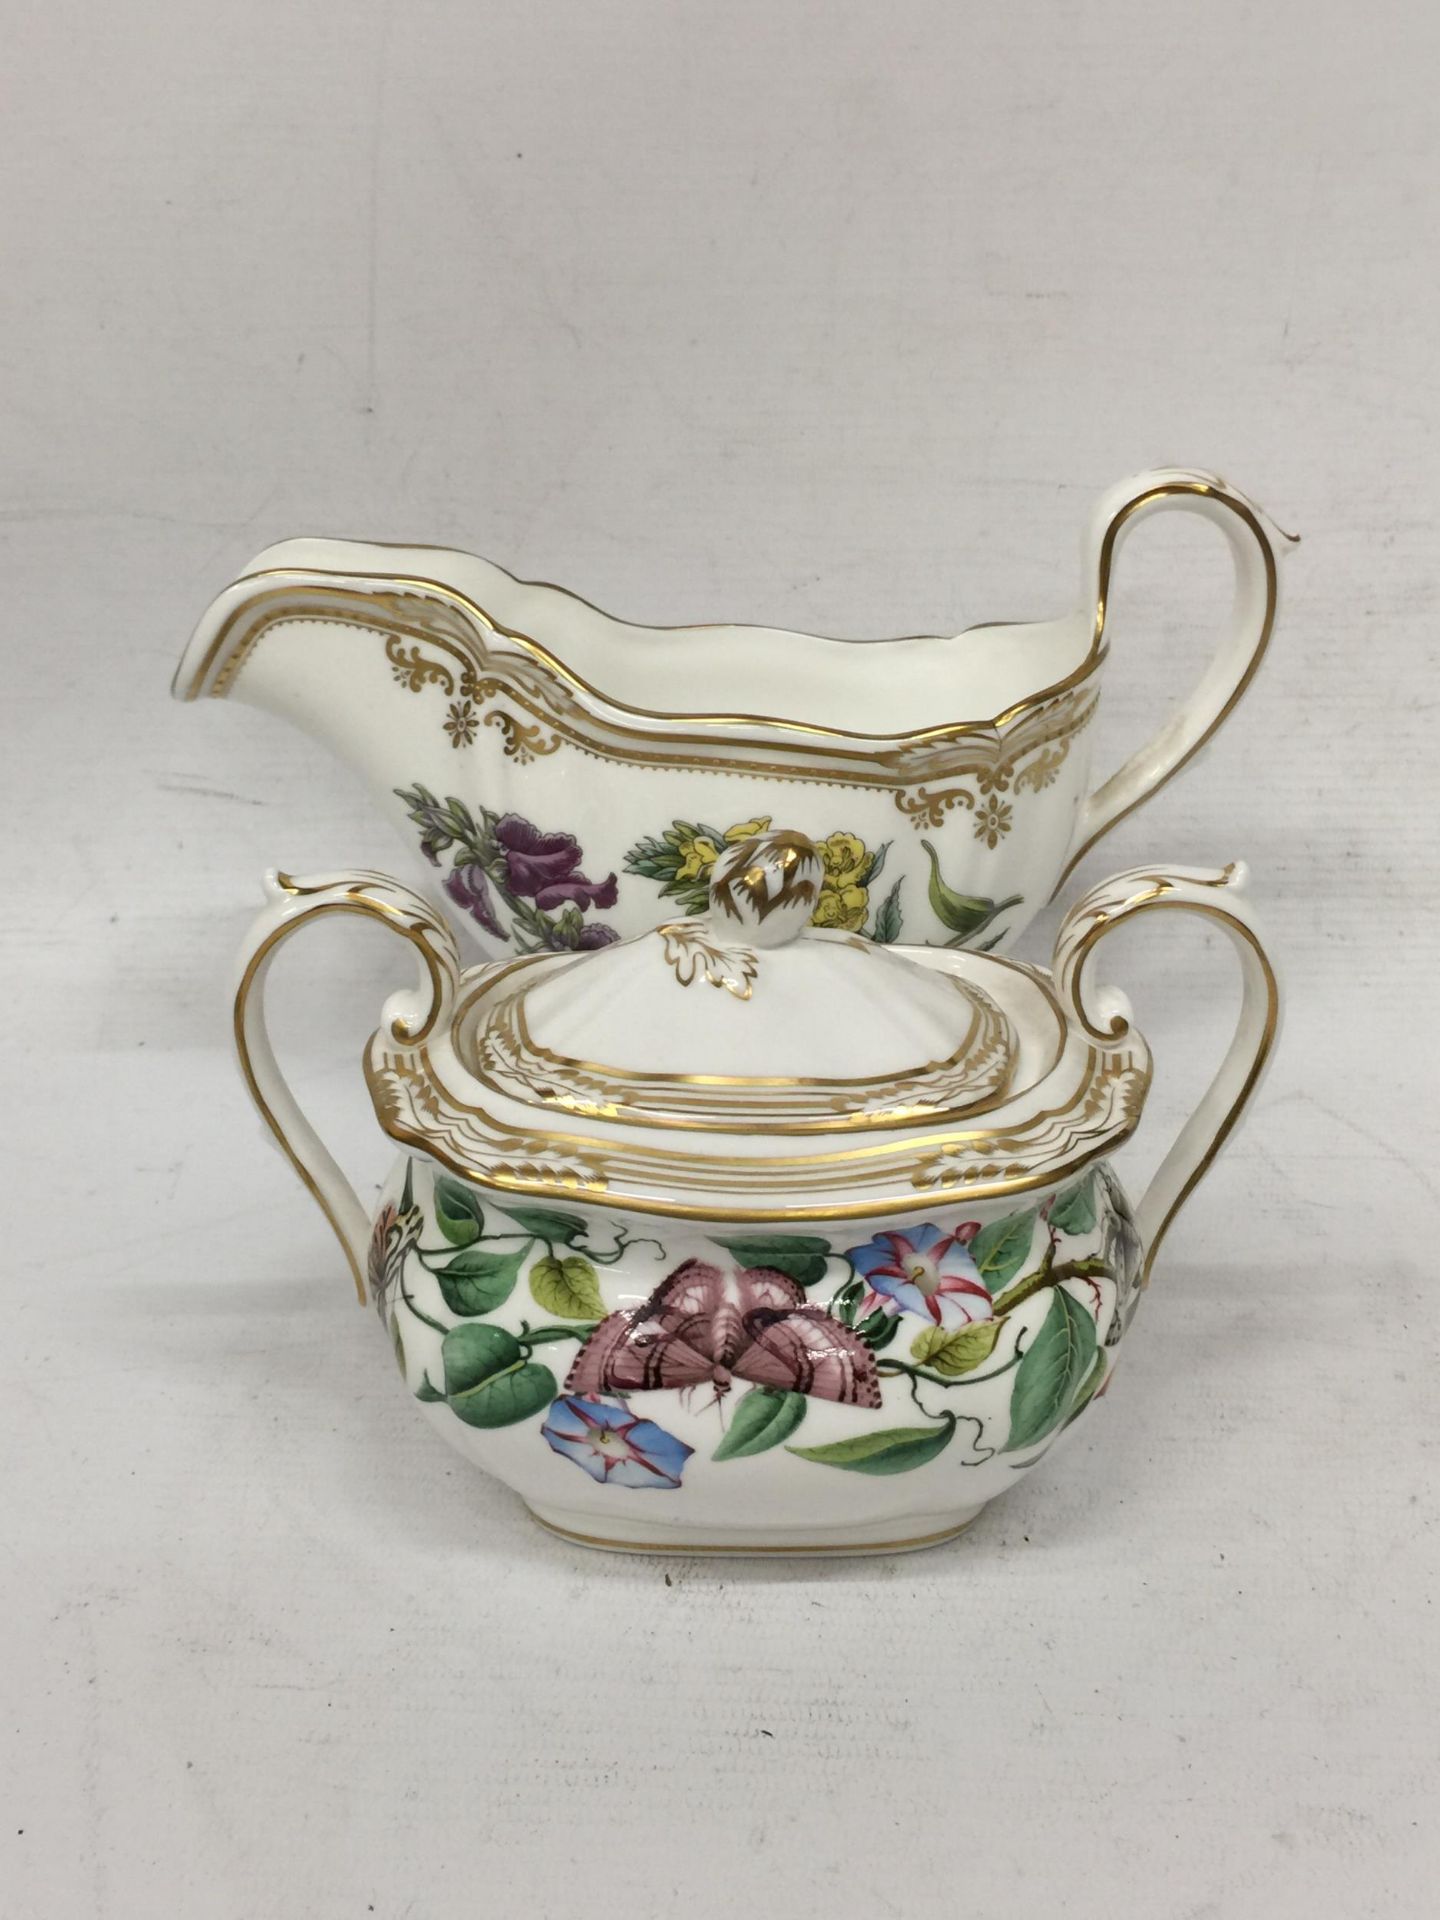 THREE PIECES OF SPODE CERAMICS TO INCLUDE SPODE AERIDES COFFEE POT, STAFFORD FLOWERS CREAM JUG AND - Image 6 of 8